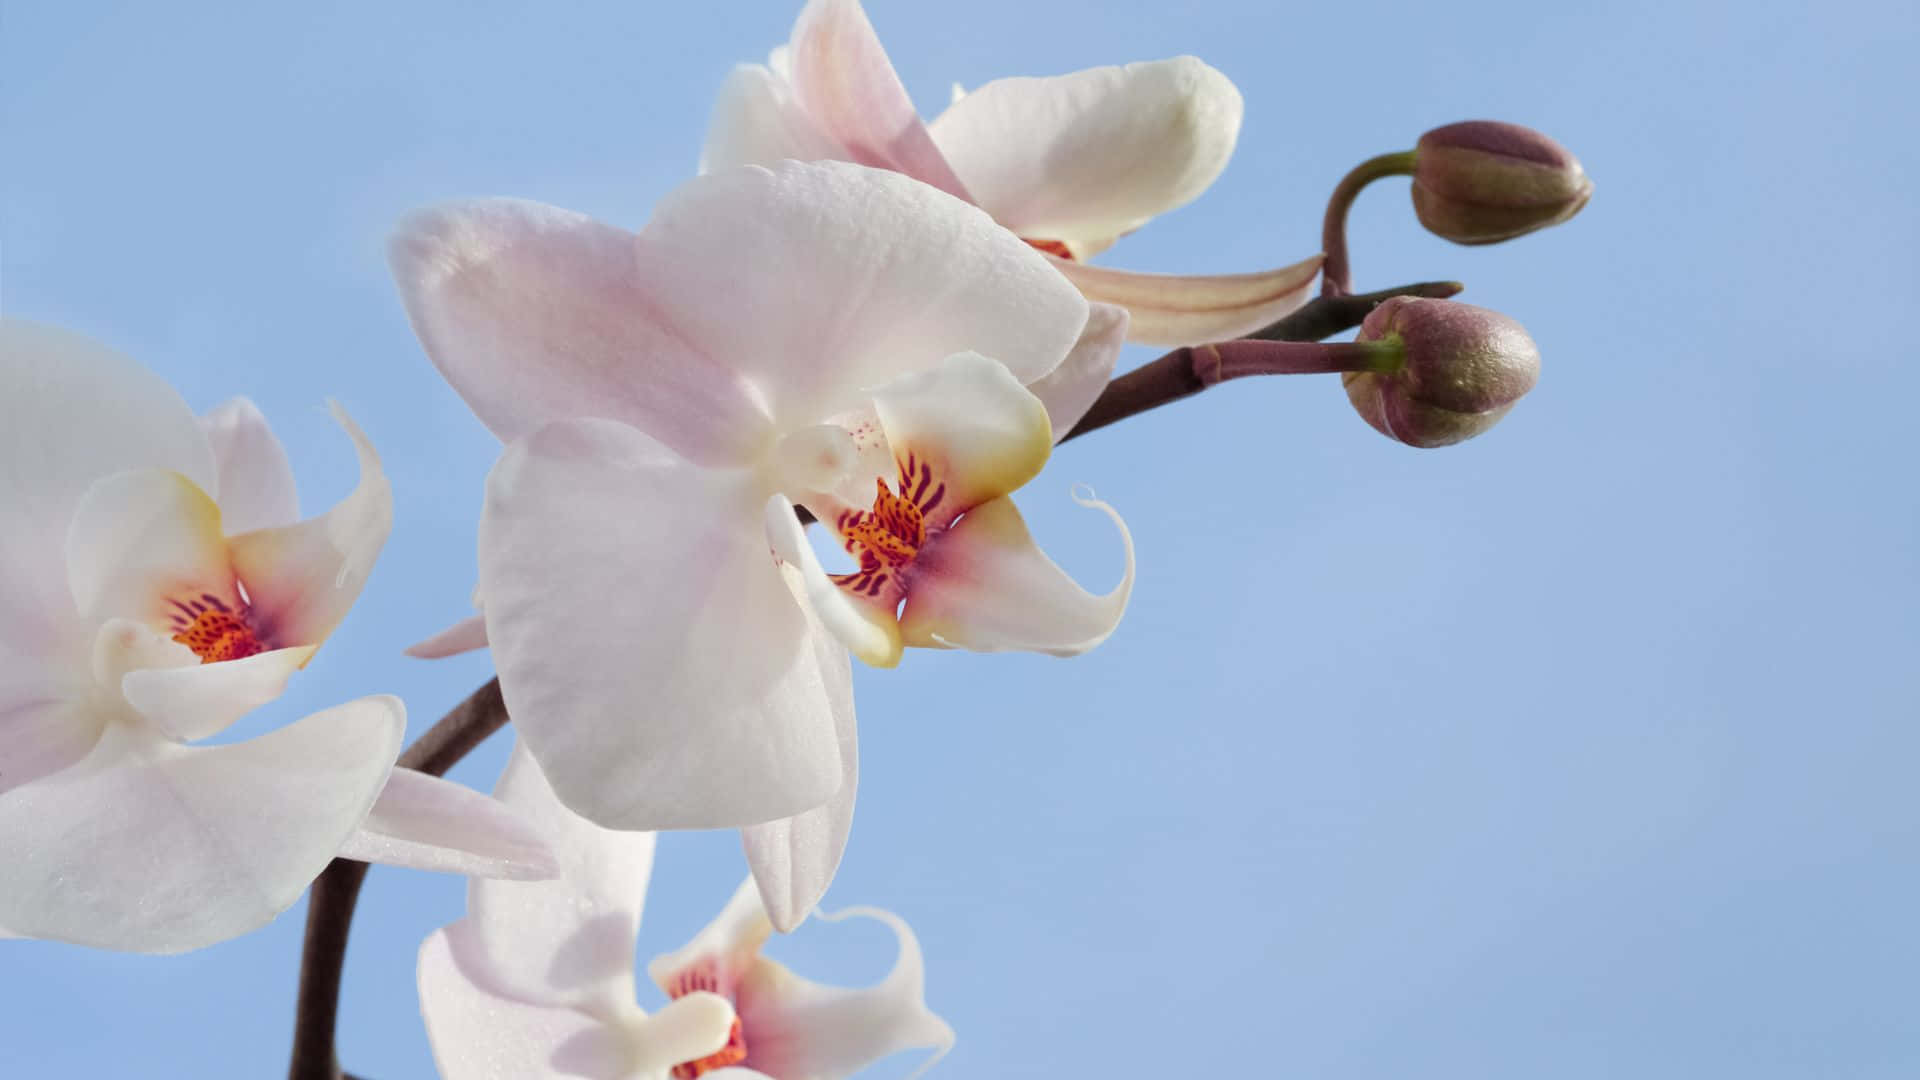 A White Orchid Flower Is Shown Against A Blue Sky